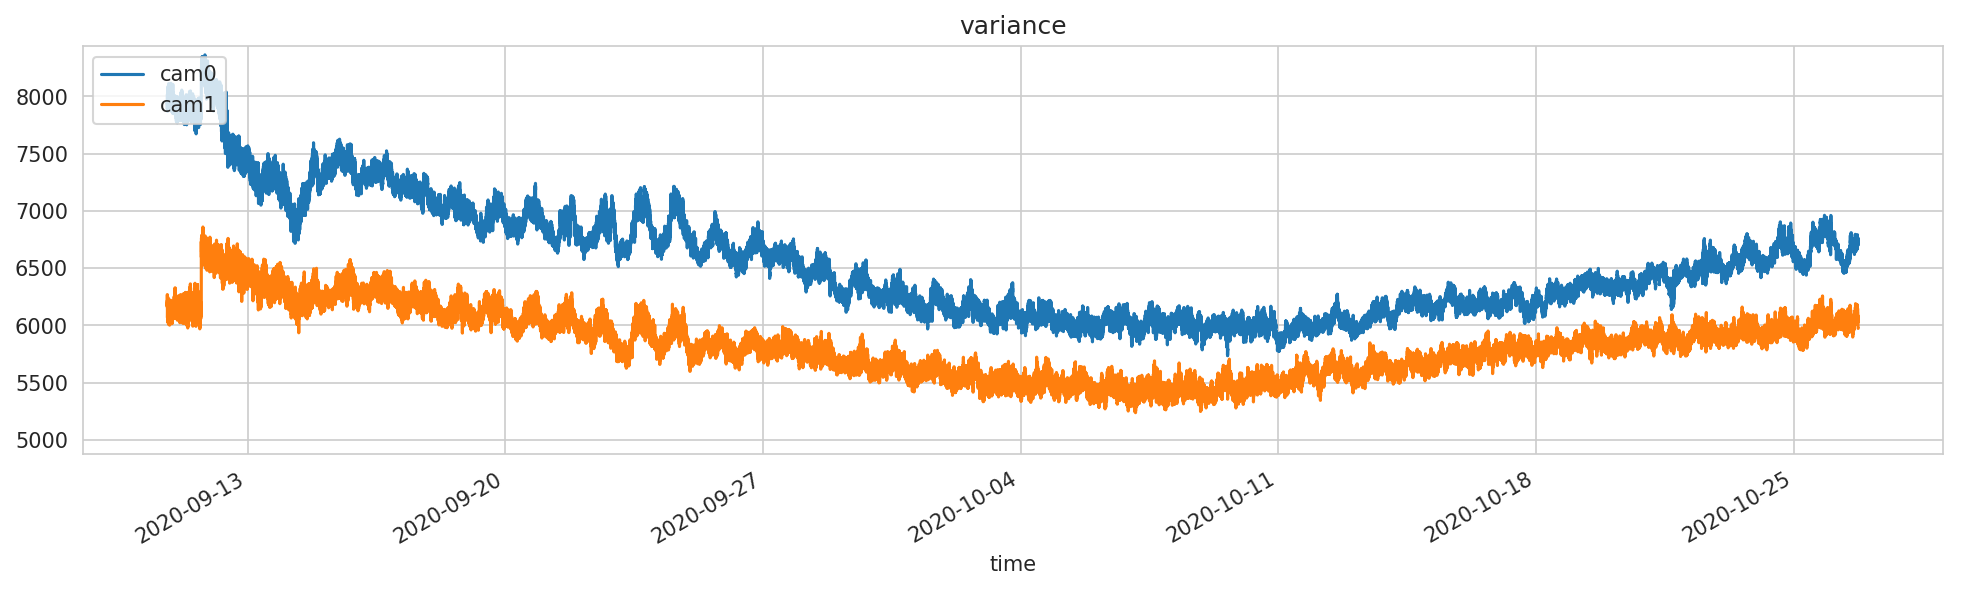 variance_metrics live preview